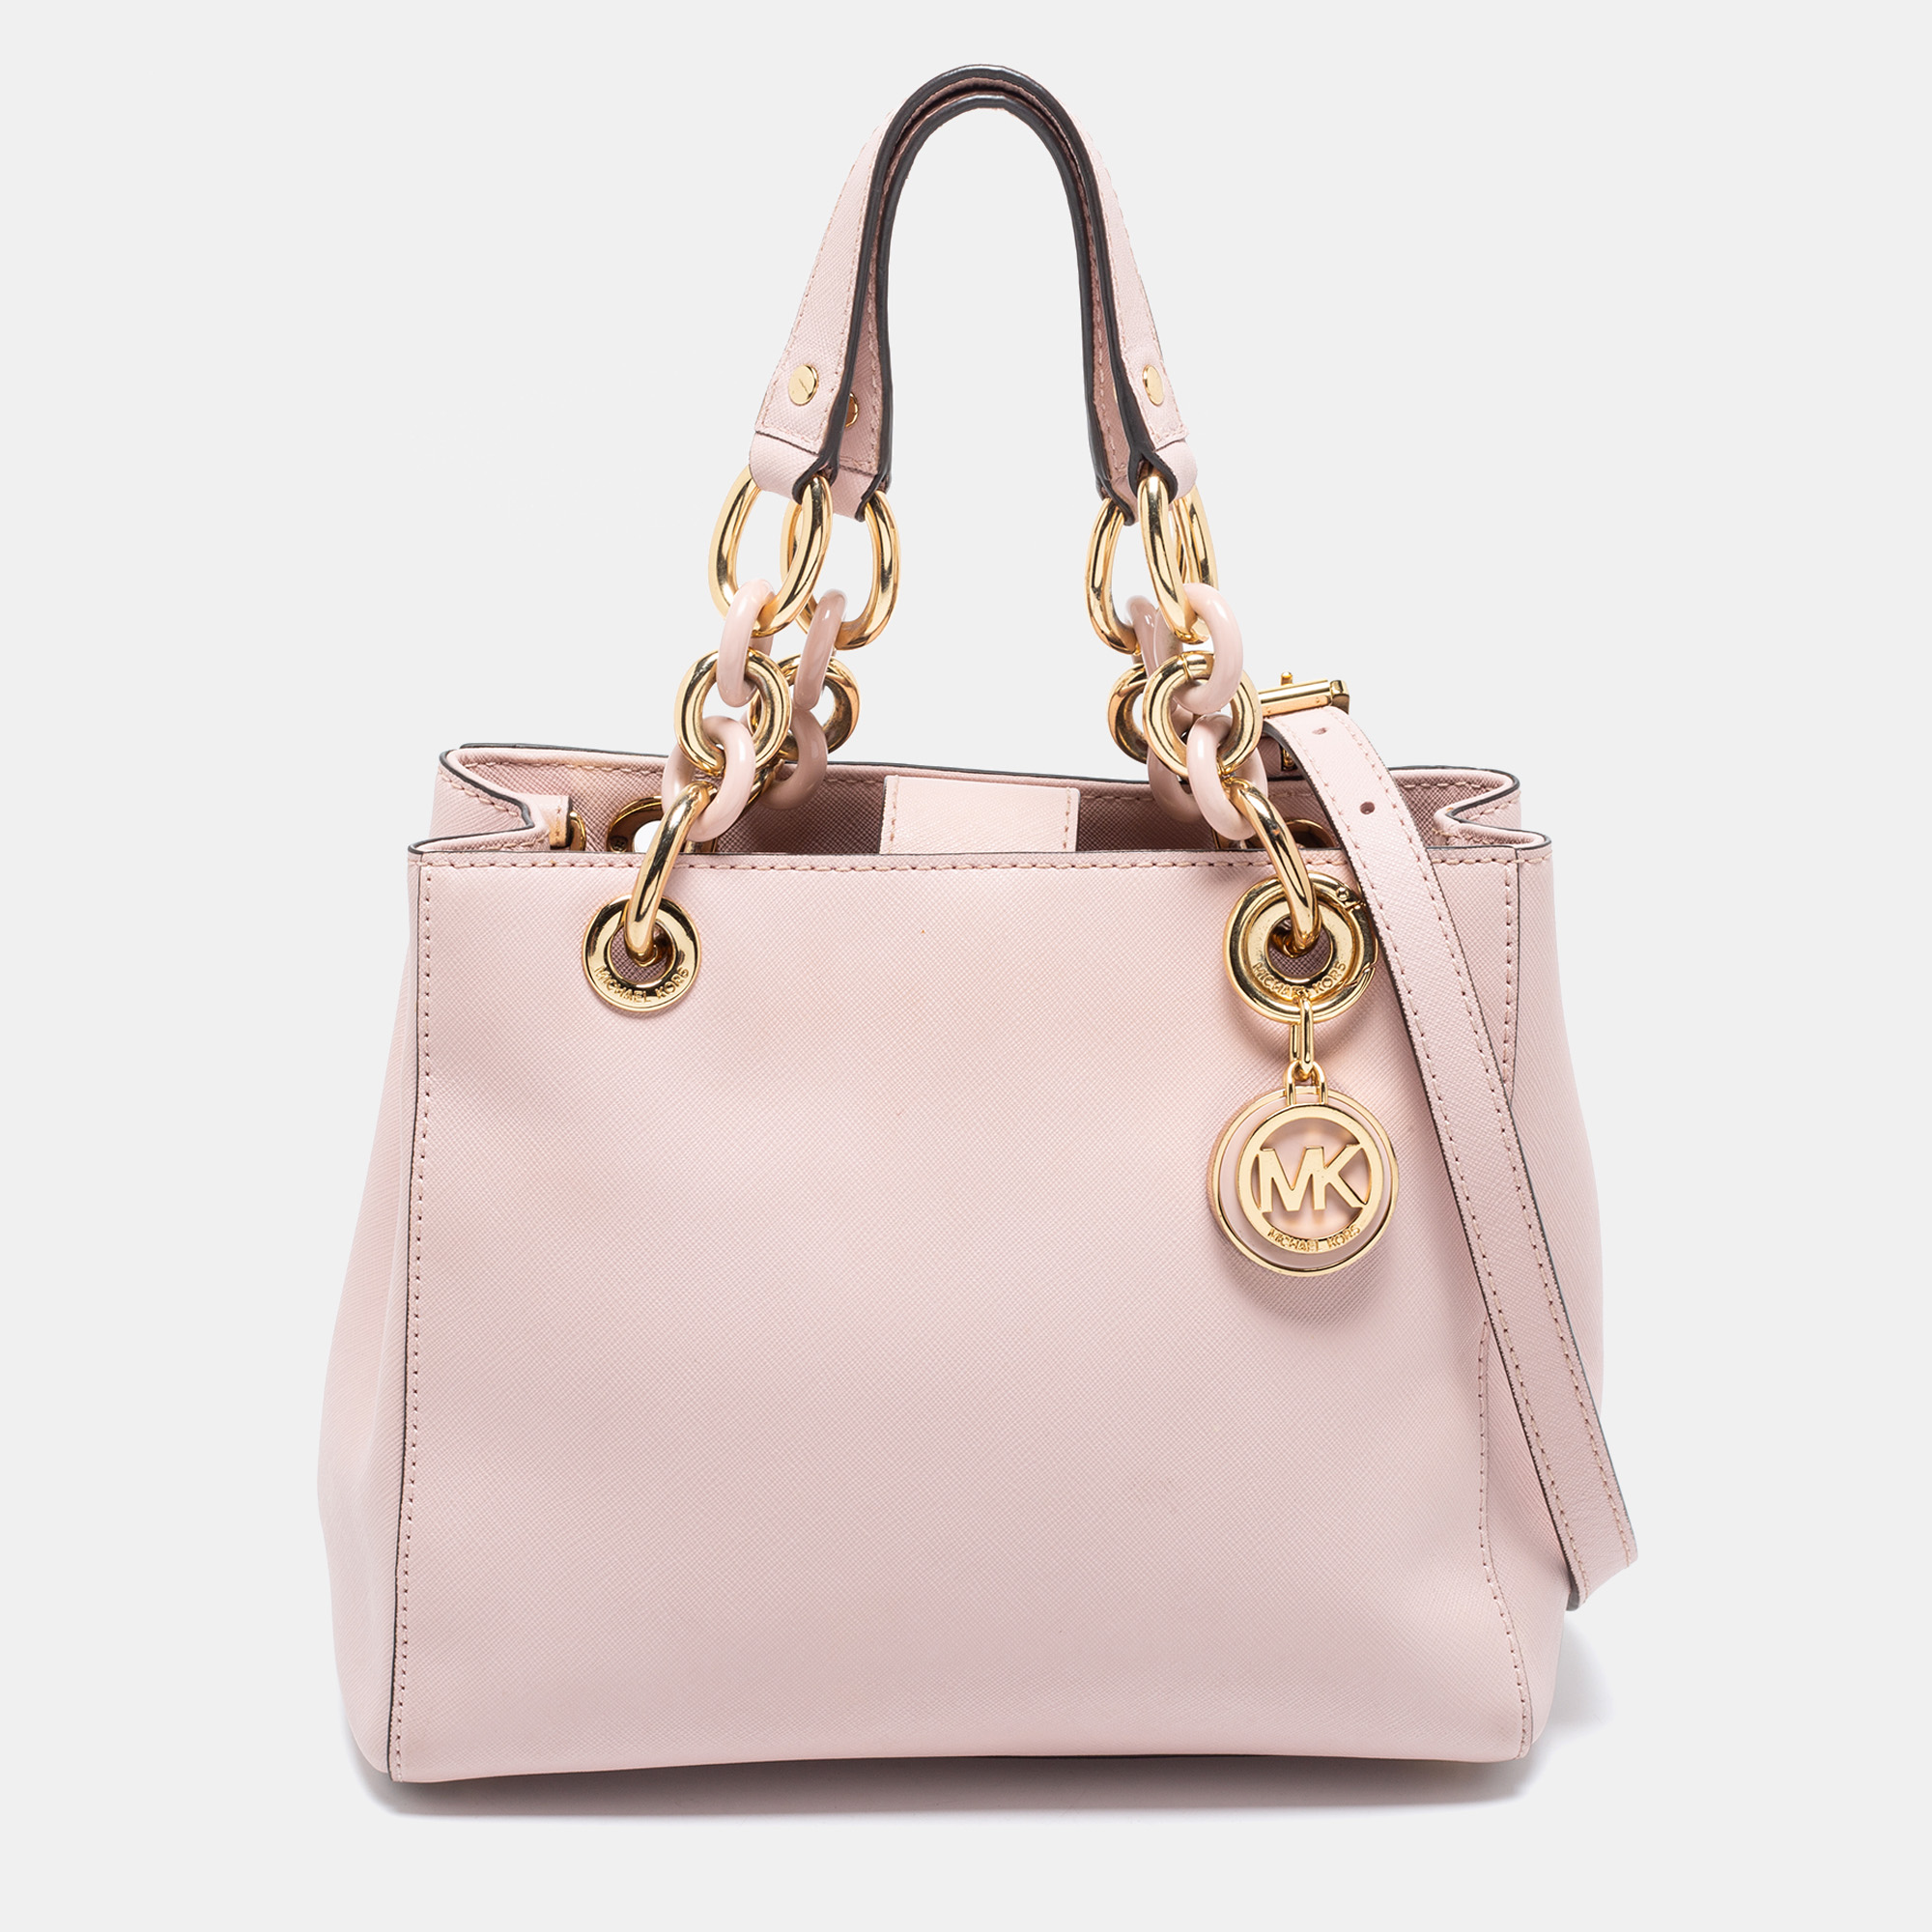 MICHAEL Michael Kors Pink Leather Small Cynthia Tote